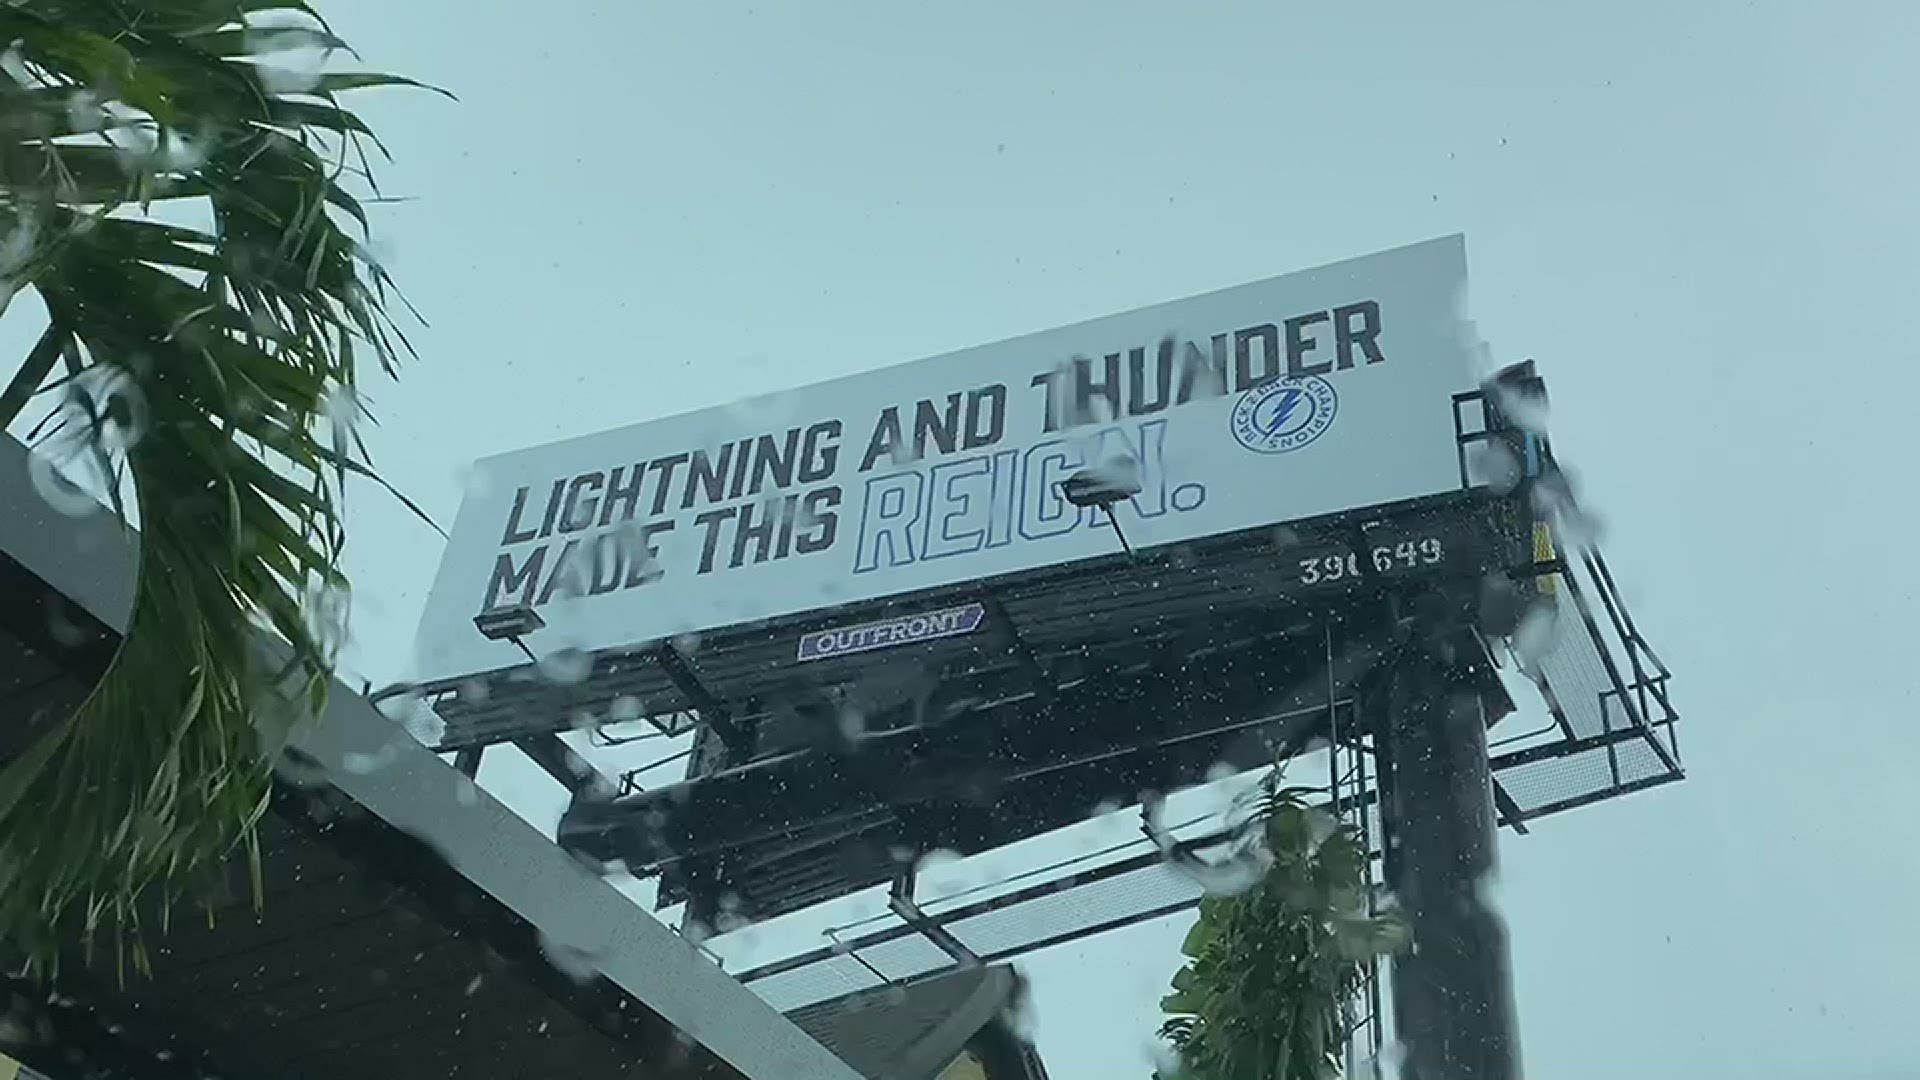 Tampa Bay Lightning - Here Comes The Thunder 